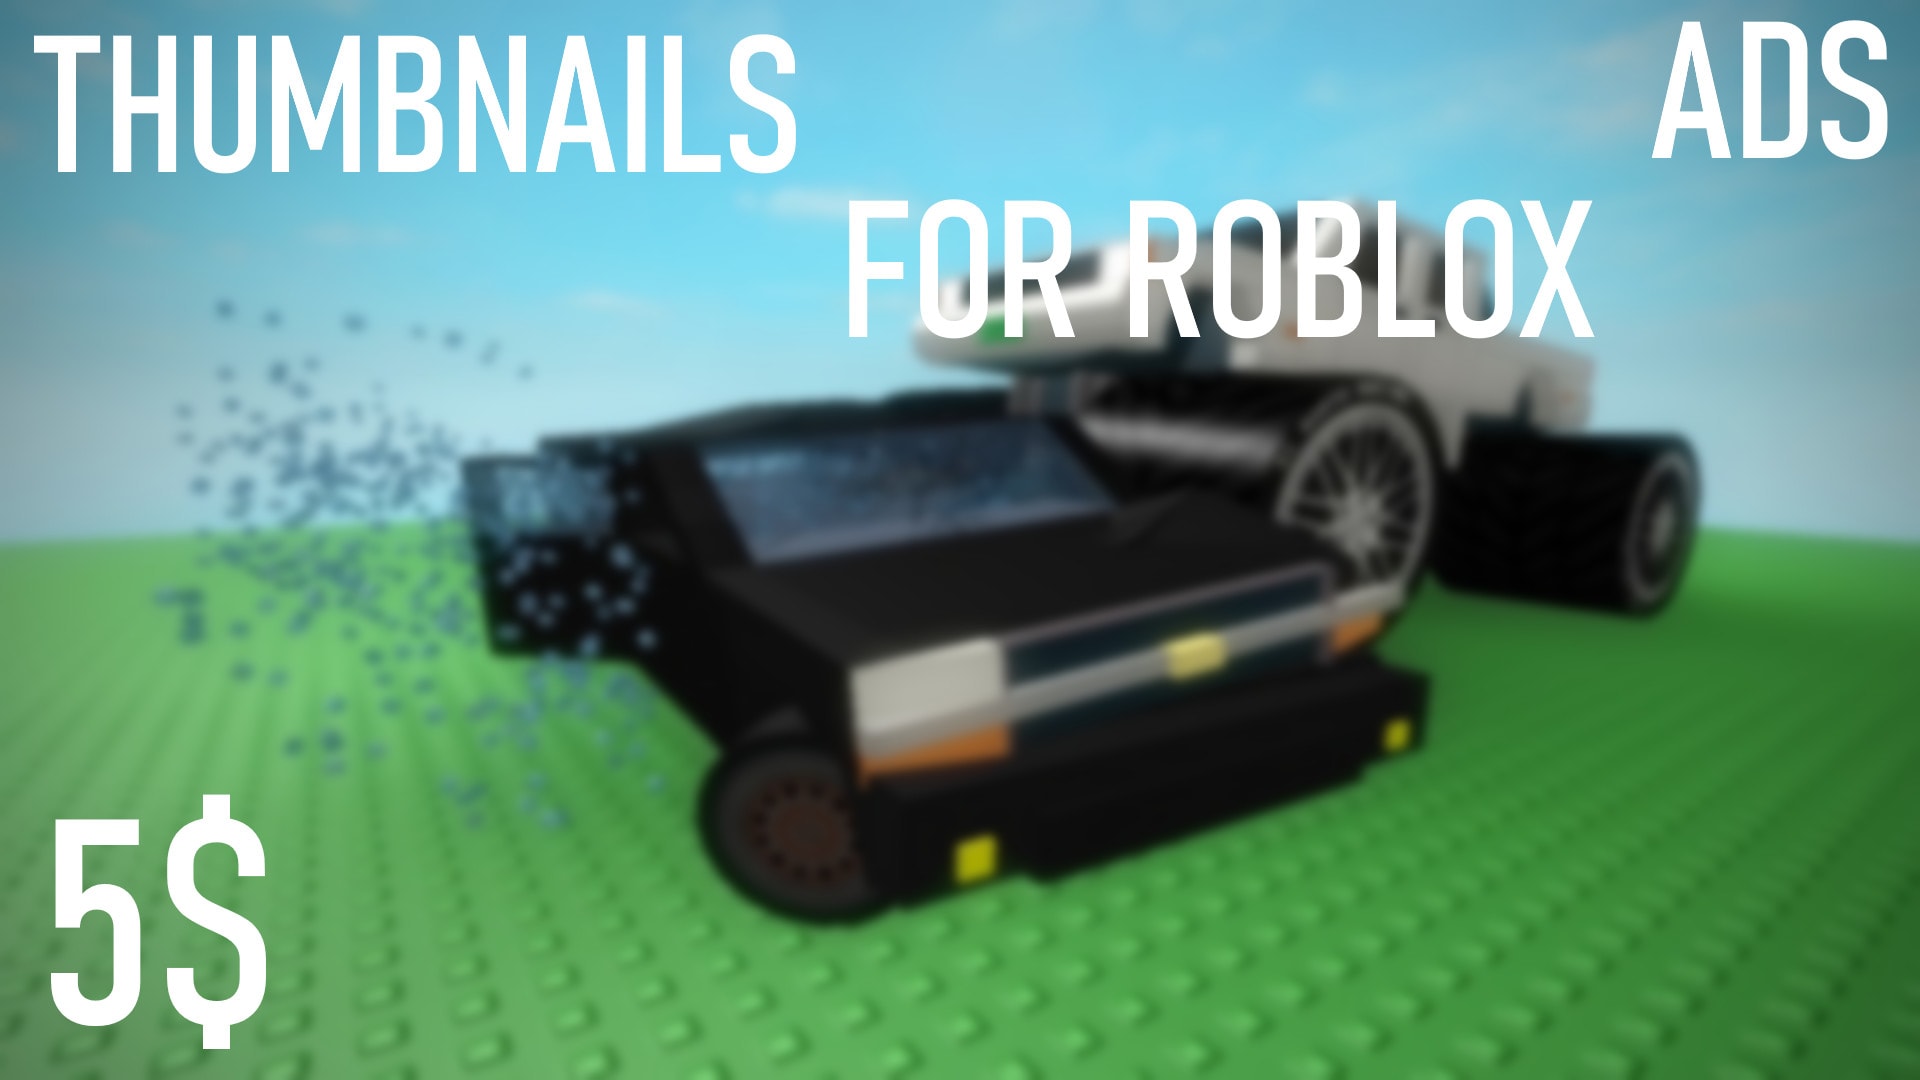 Make You A Roblox Thumbnail Or Ad In Under 1 Hour By Gabedaboy - 1 hour roblox